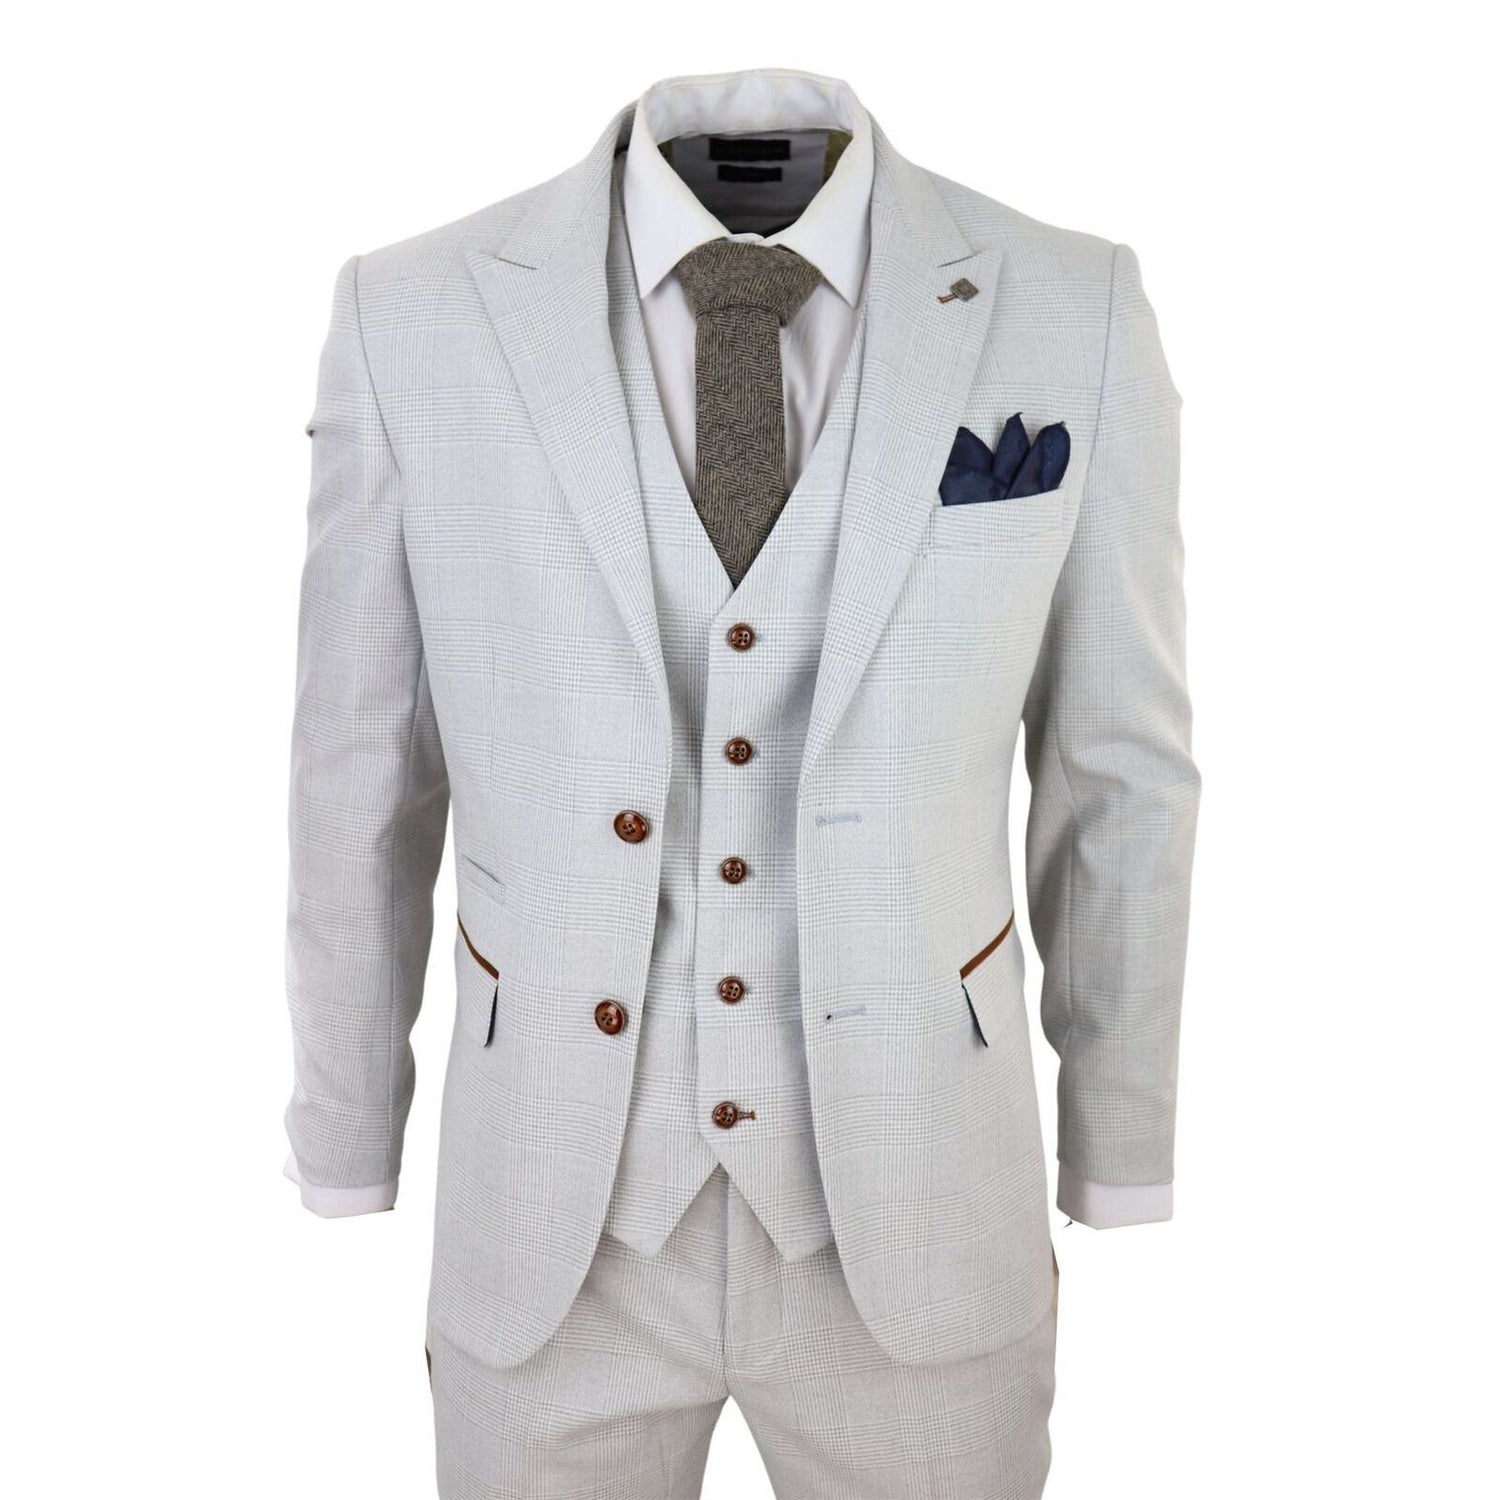 Mens Grey Stone 3 Piece Tweed Check Suit - Upperclass Fashions 